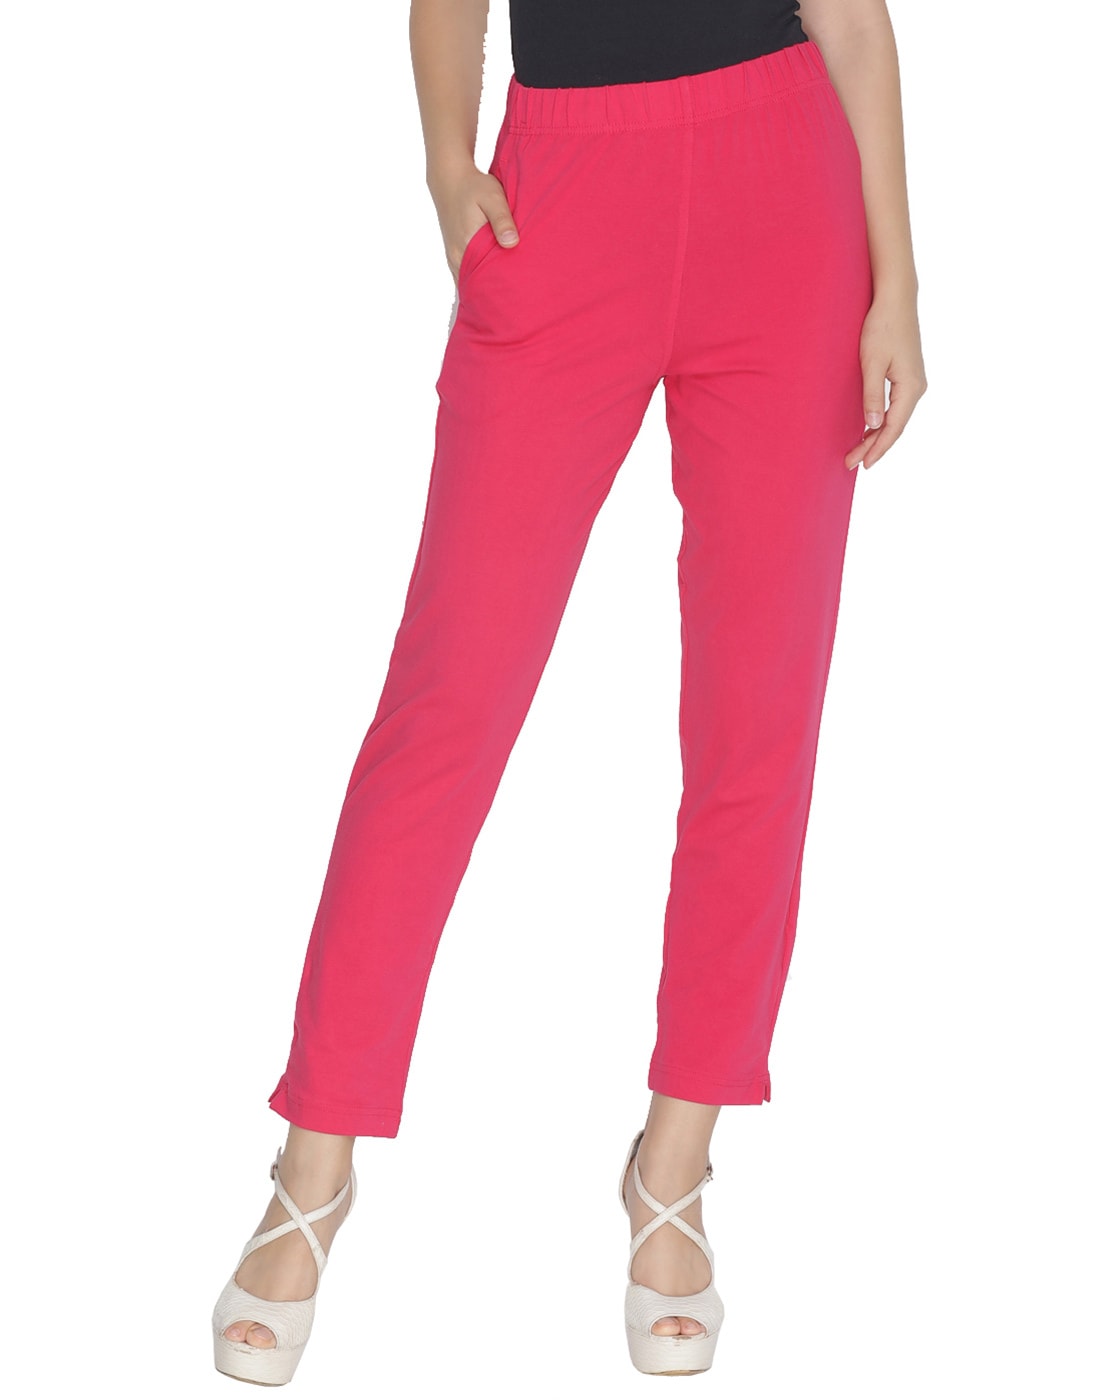 Lyra Solid Coloured Free Size Kurti Pant for WomenRed Buy Lyra Solid  Coloured Free Size Kurti Pant for WomenRed Online at Best Price in India   Nykaa